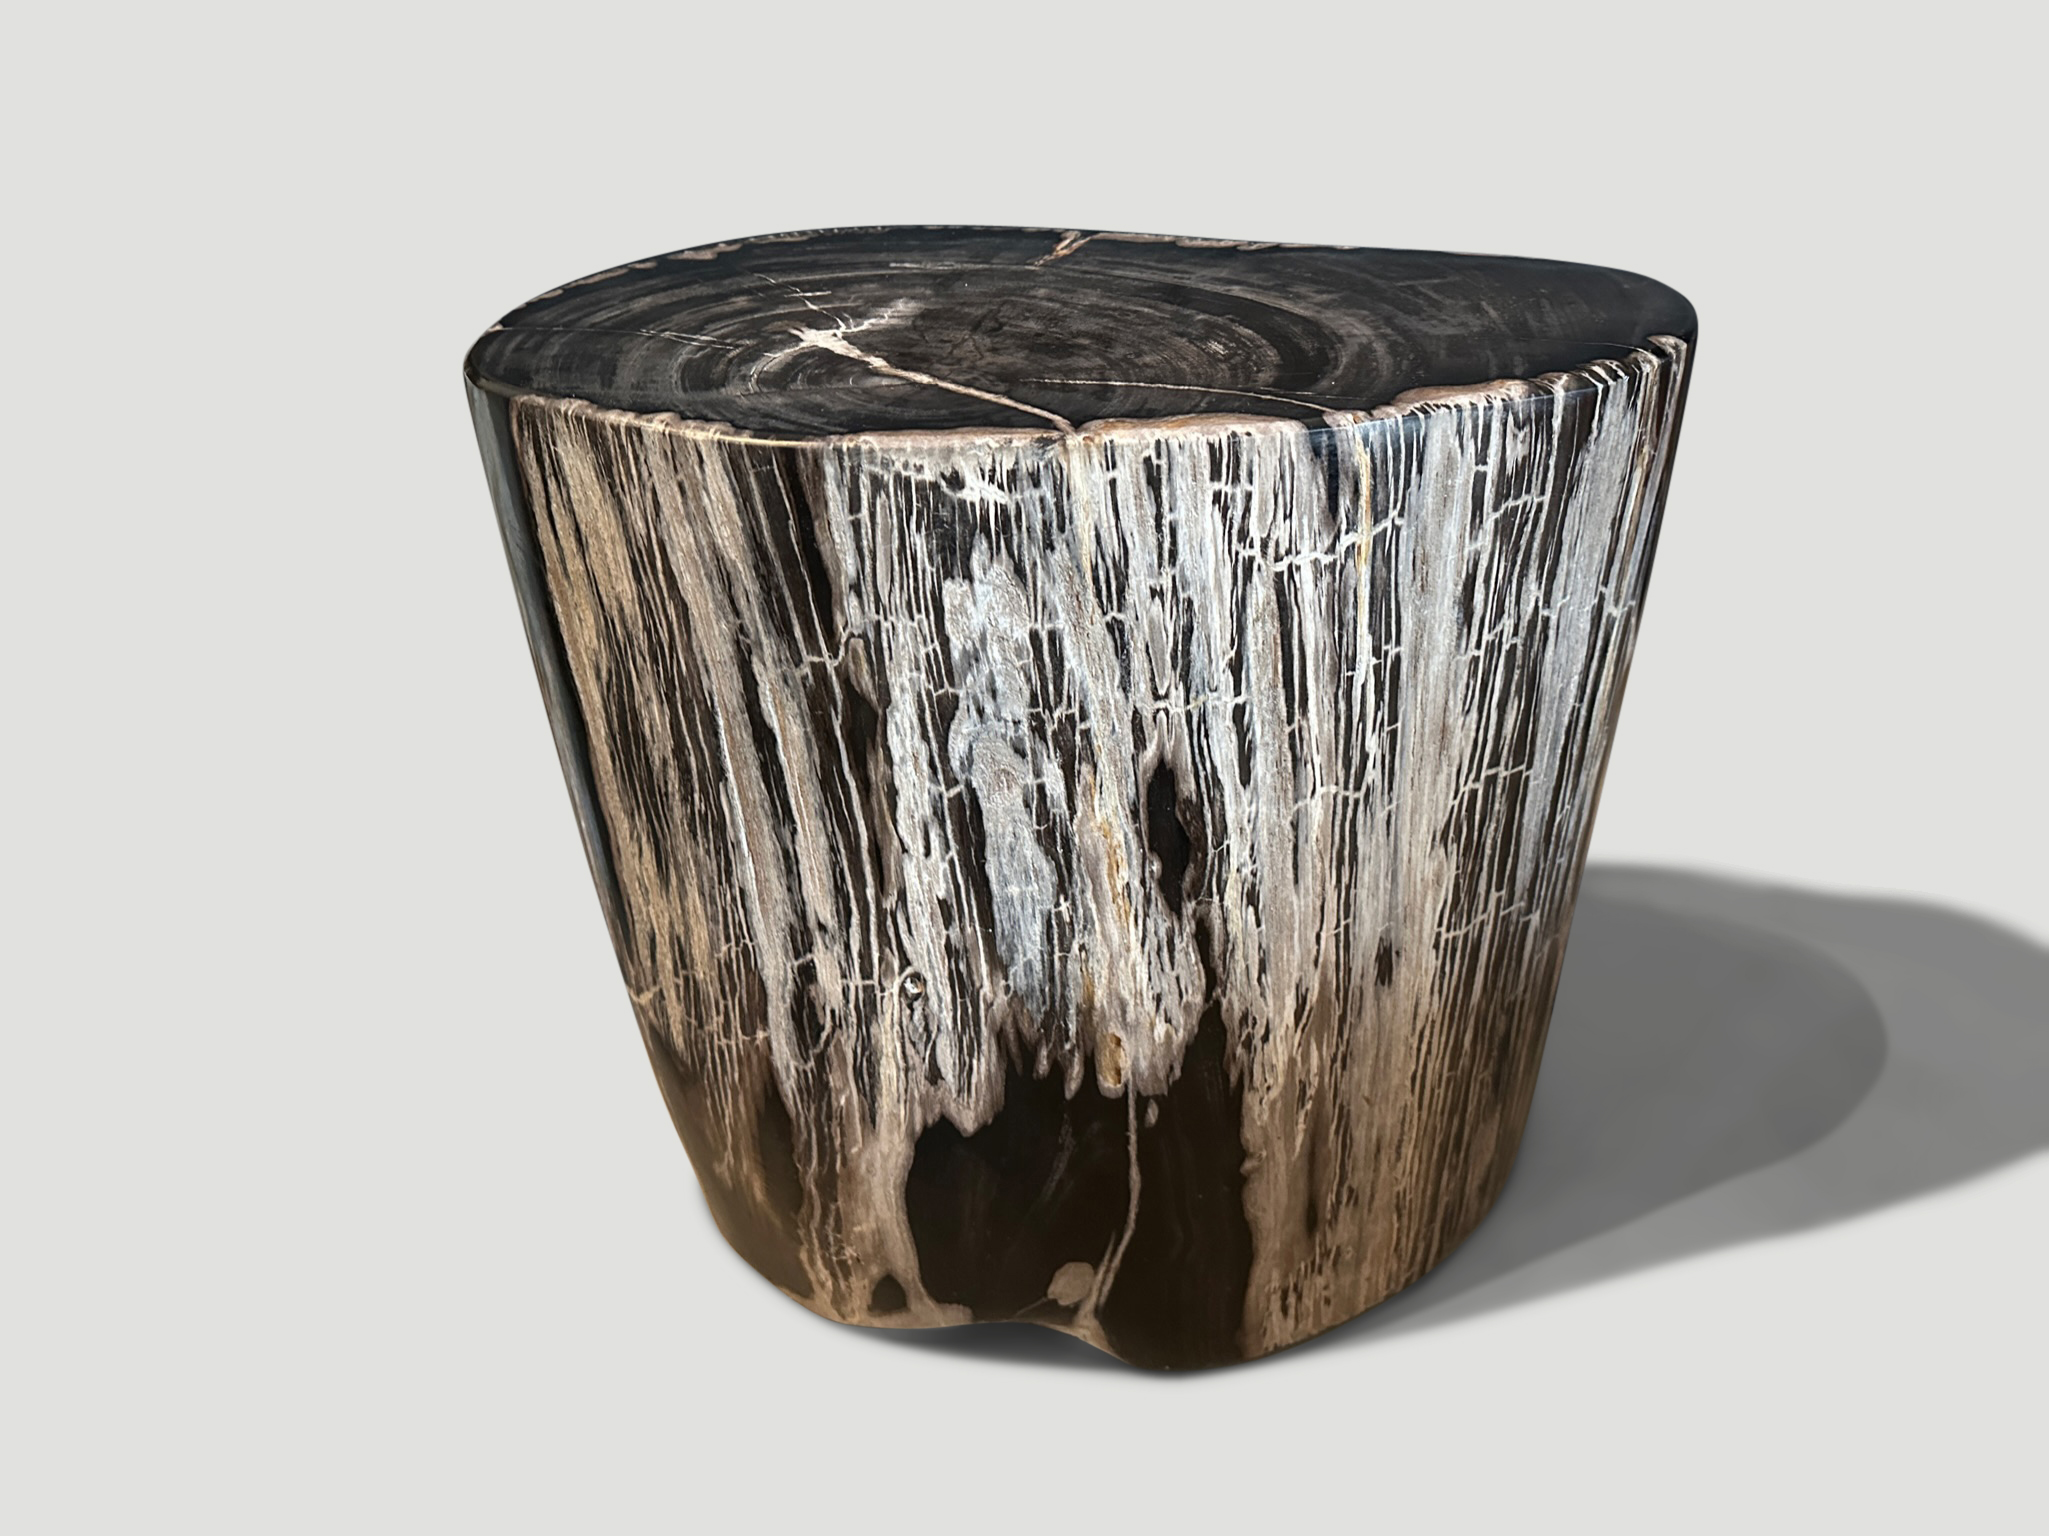 high quality ancient petrified wood side table